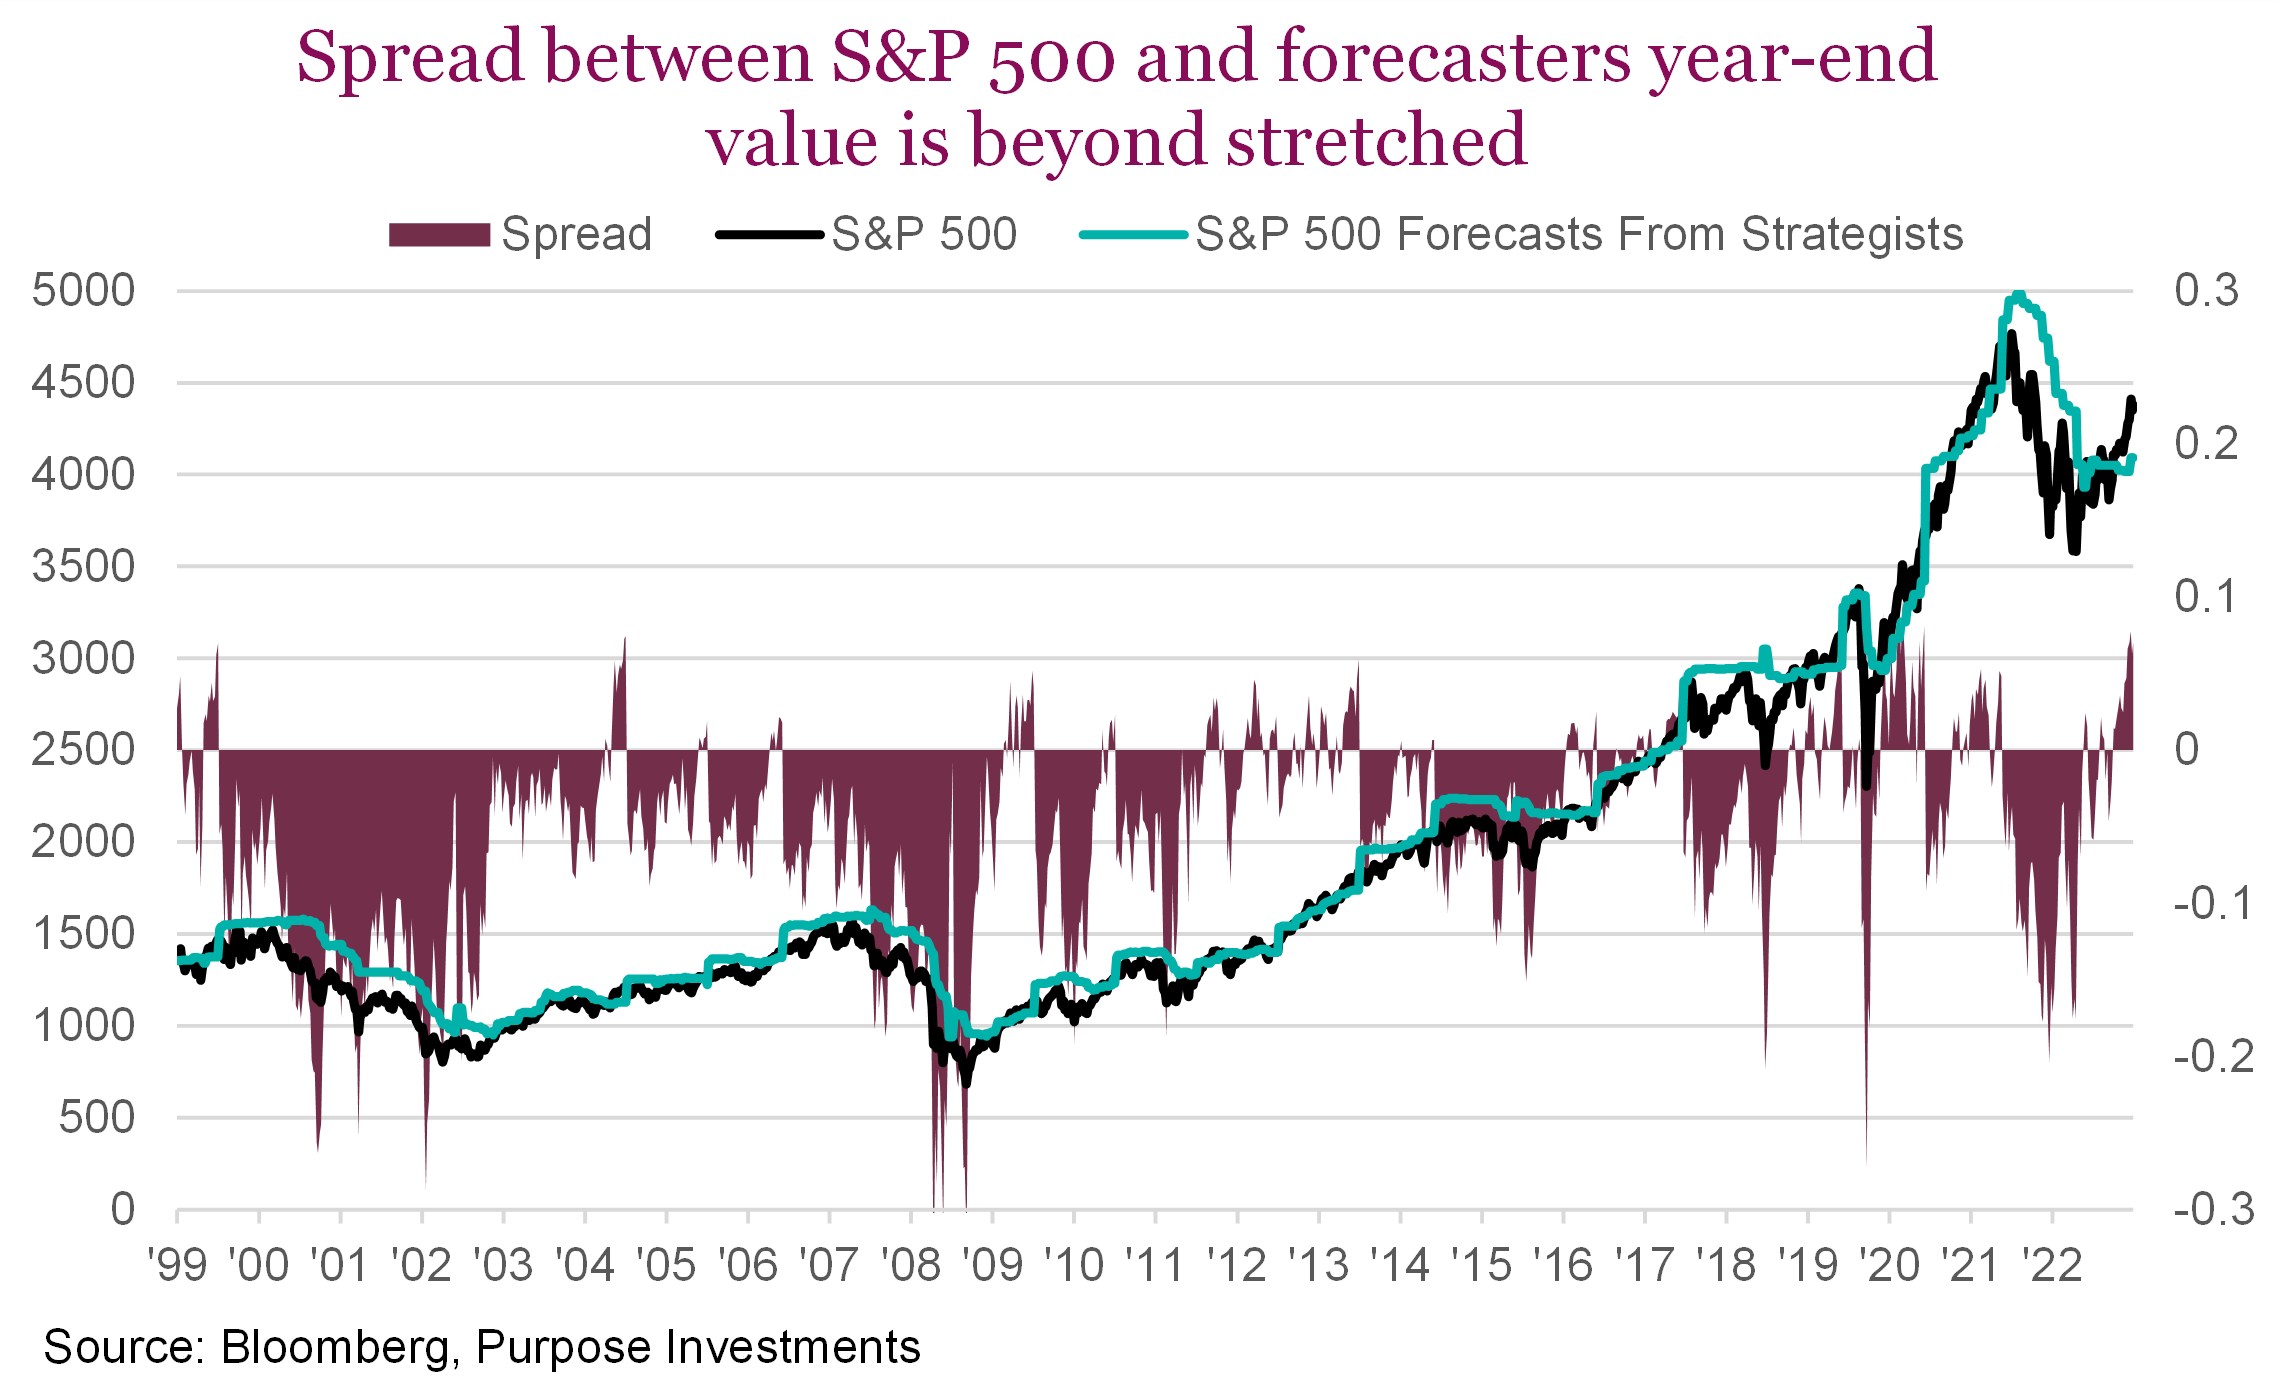 Spread between S&P 500 and forecasters year-end value is beyond stretched